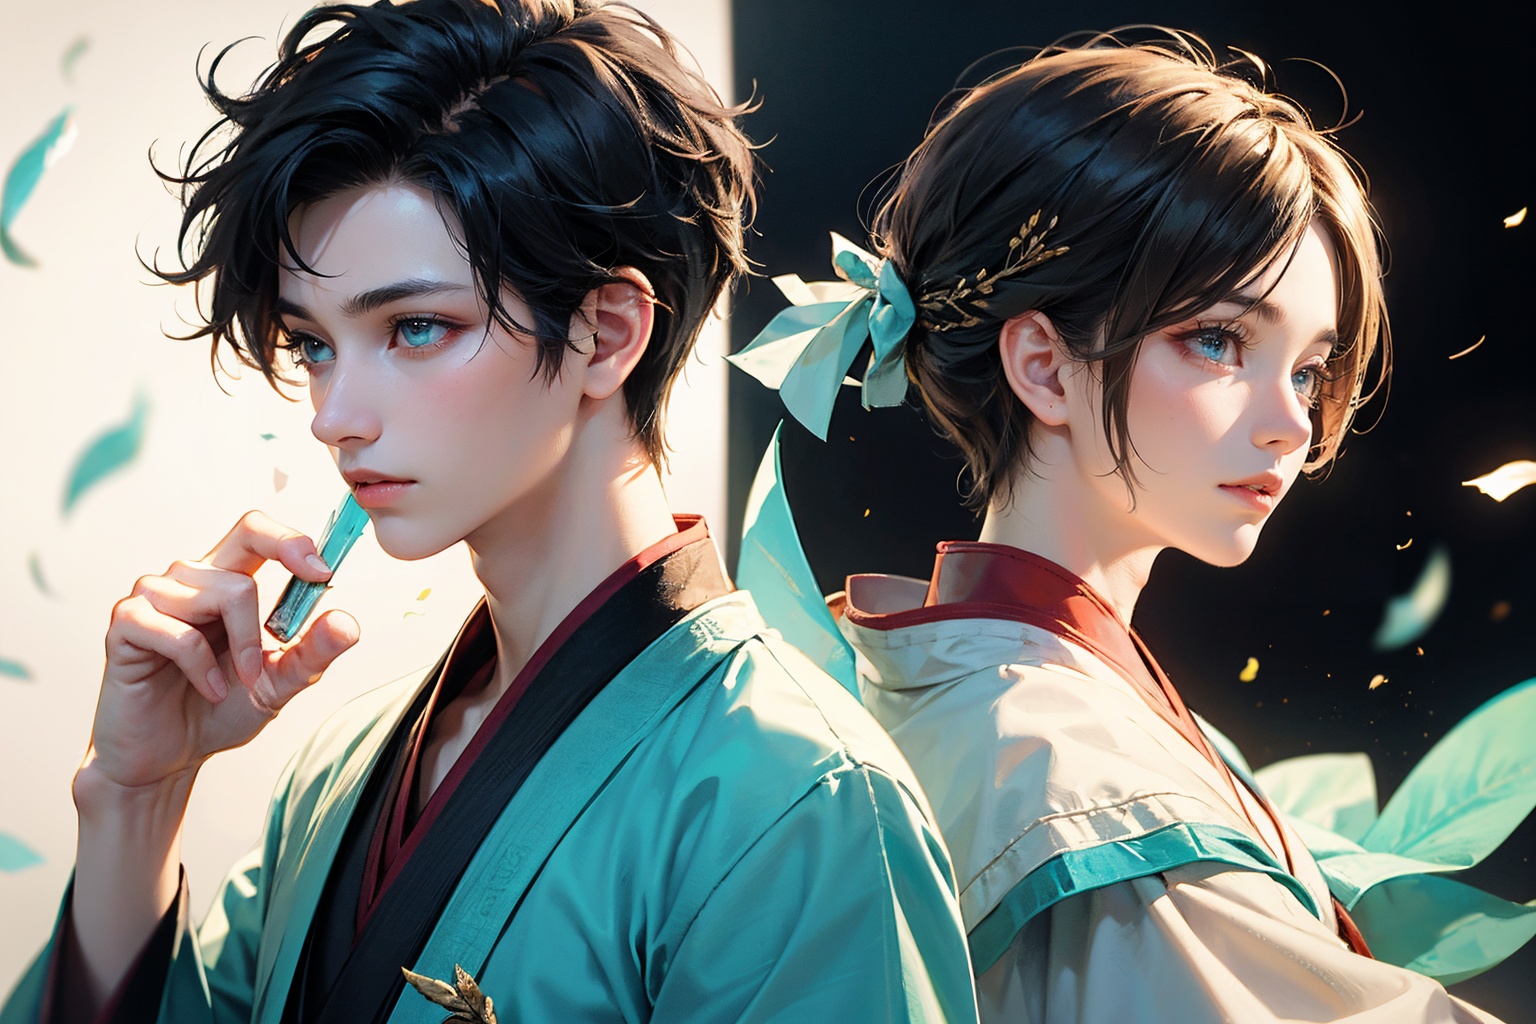 (tmasterpiece),(Best quality at best),Cinematic quality,Rendered by Octane,Ultra-detailed details,Wind magic,(1boy:1.5),Face of a young man,Facial detail portrayal,Perfect facial features,(The air is filled with cyan wind blades:1.5),watch audience,(Ancient Chinese Hanfu:1.2),(holding a longsword:1.2),picture puzzle,two people,back to back,